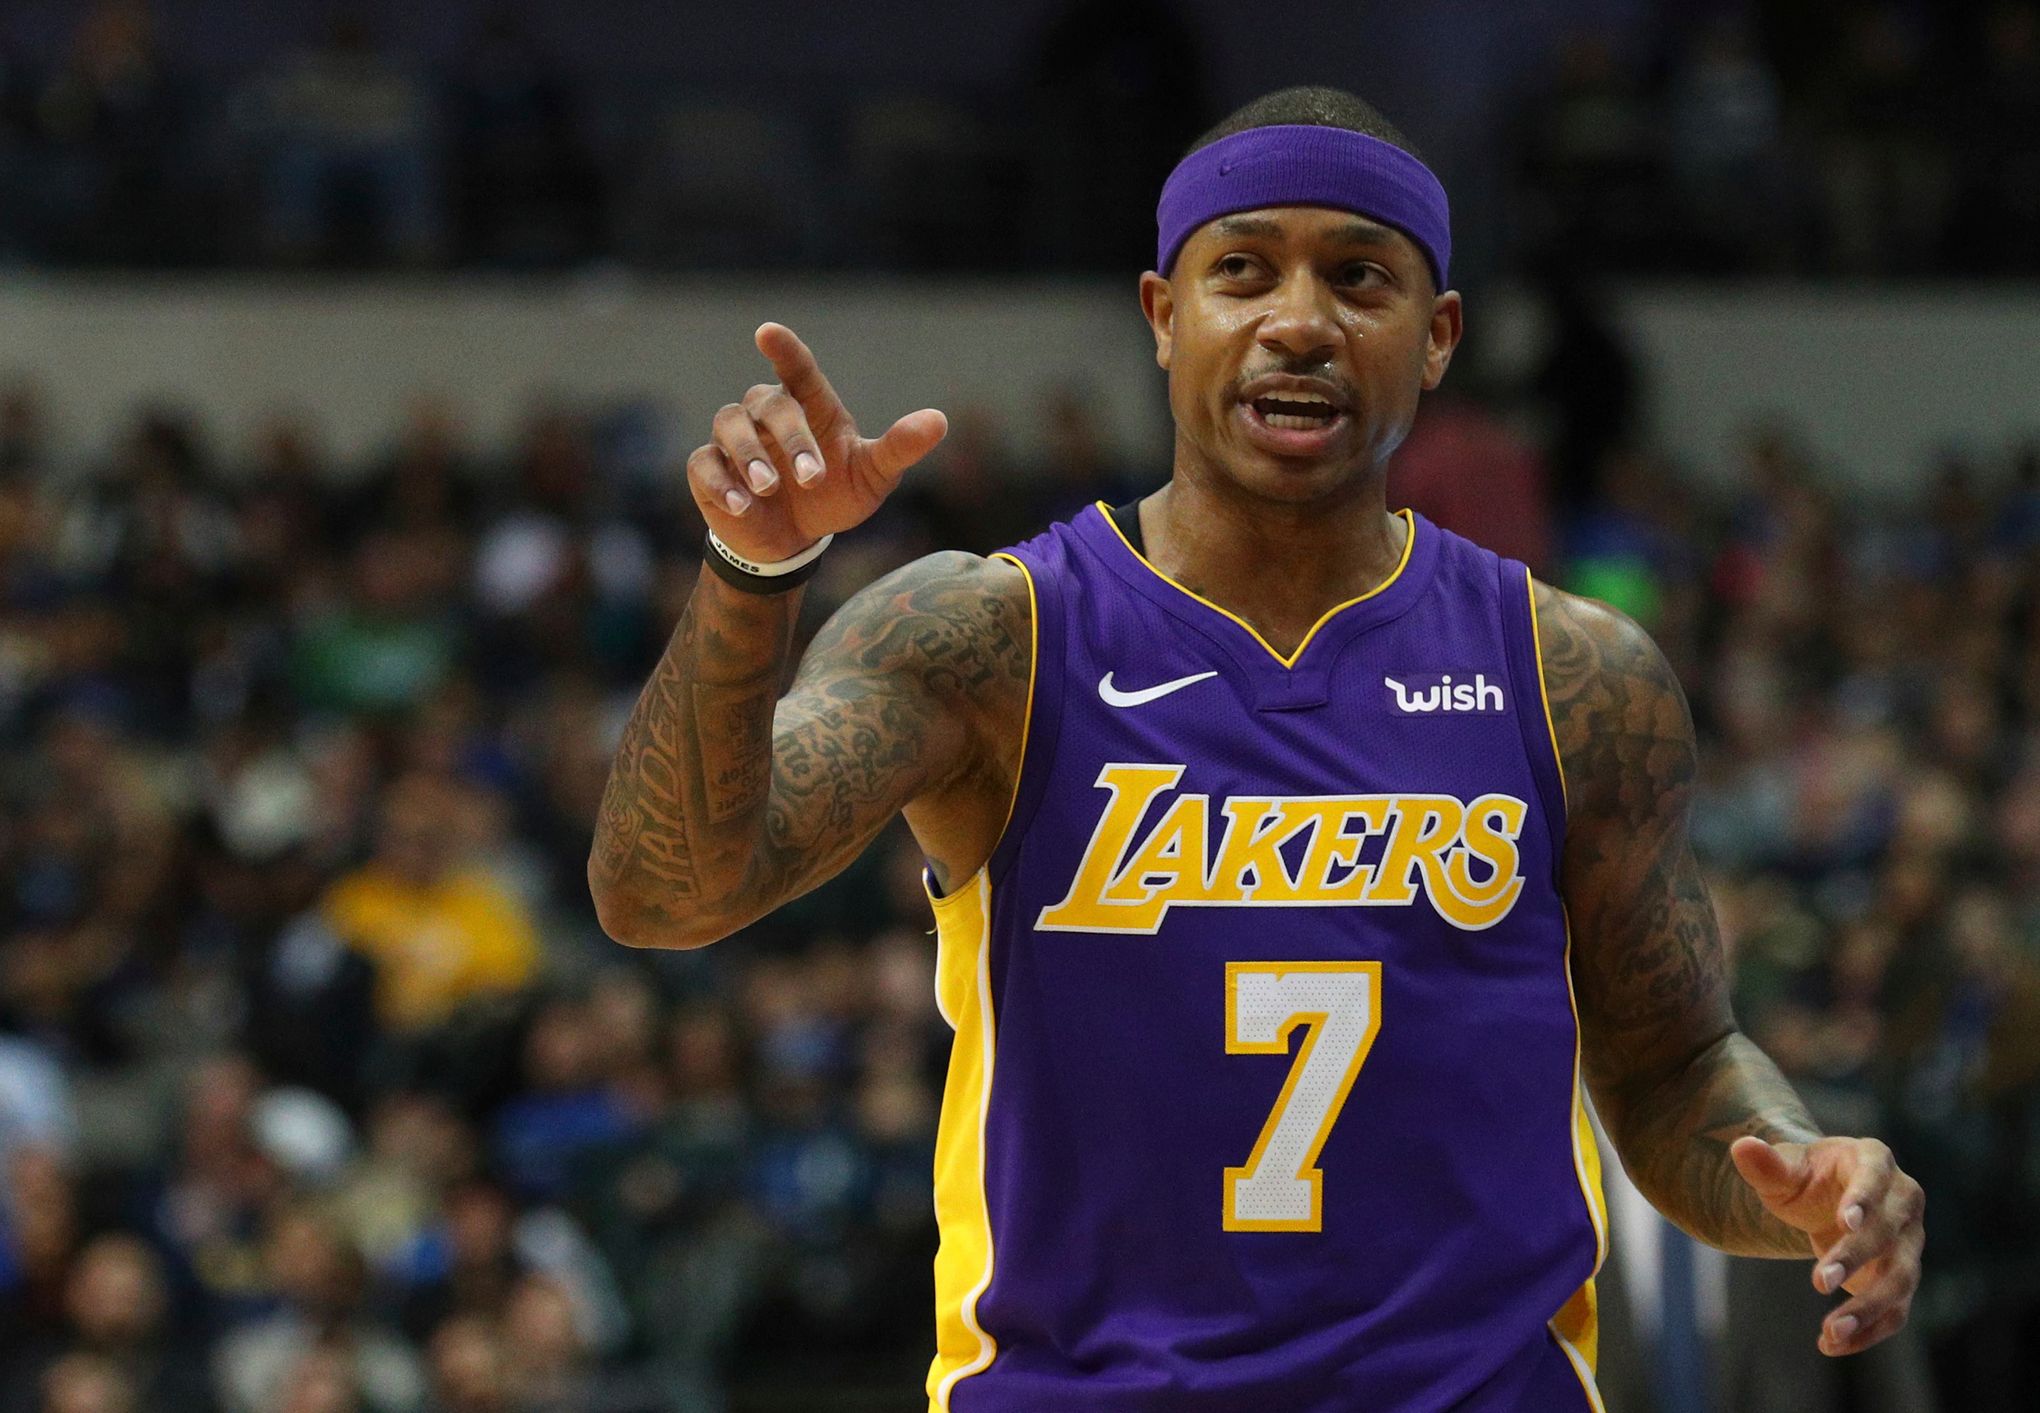 Just when you think Isaiah Thomas can't get any better, he does